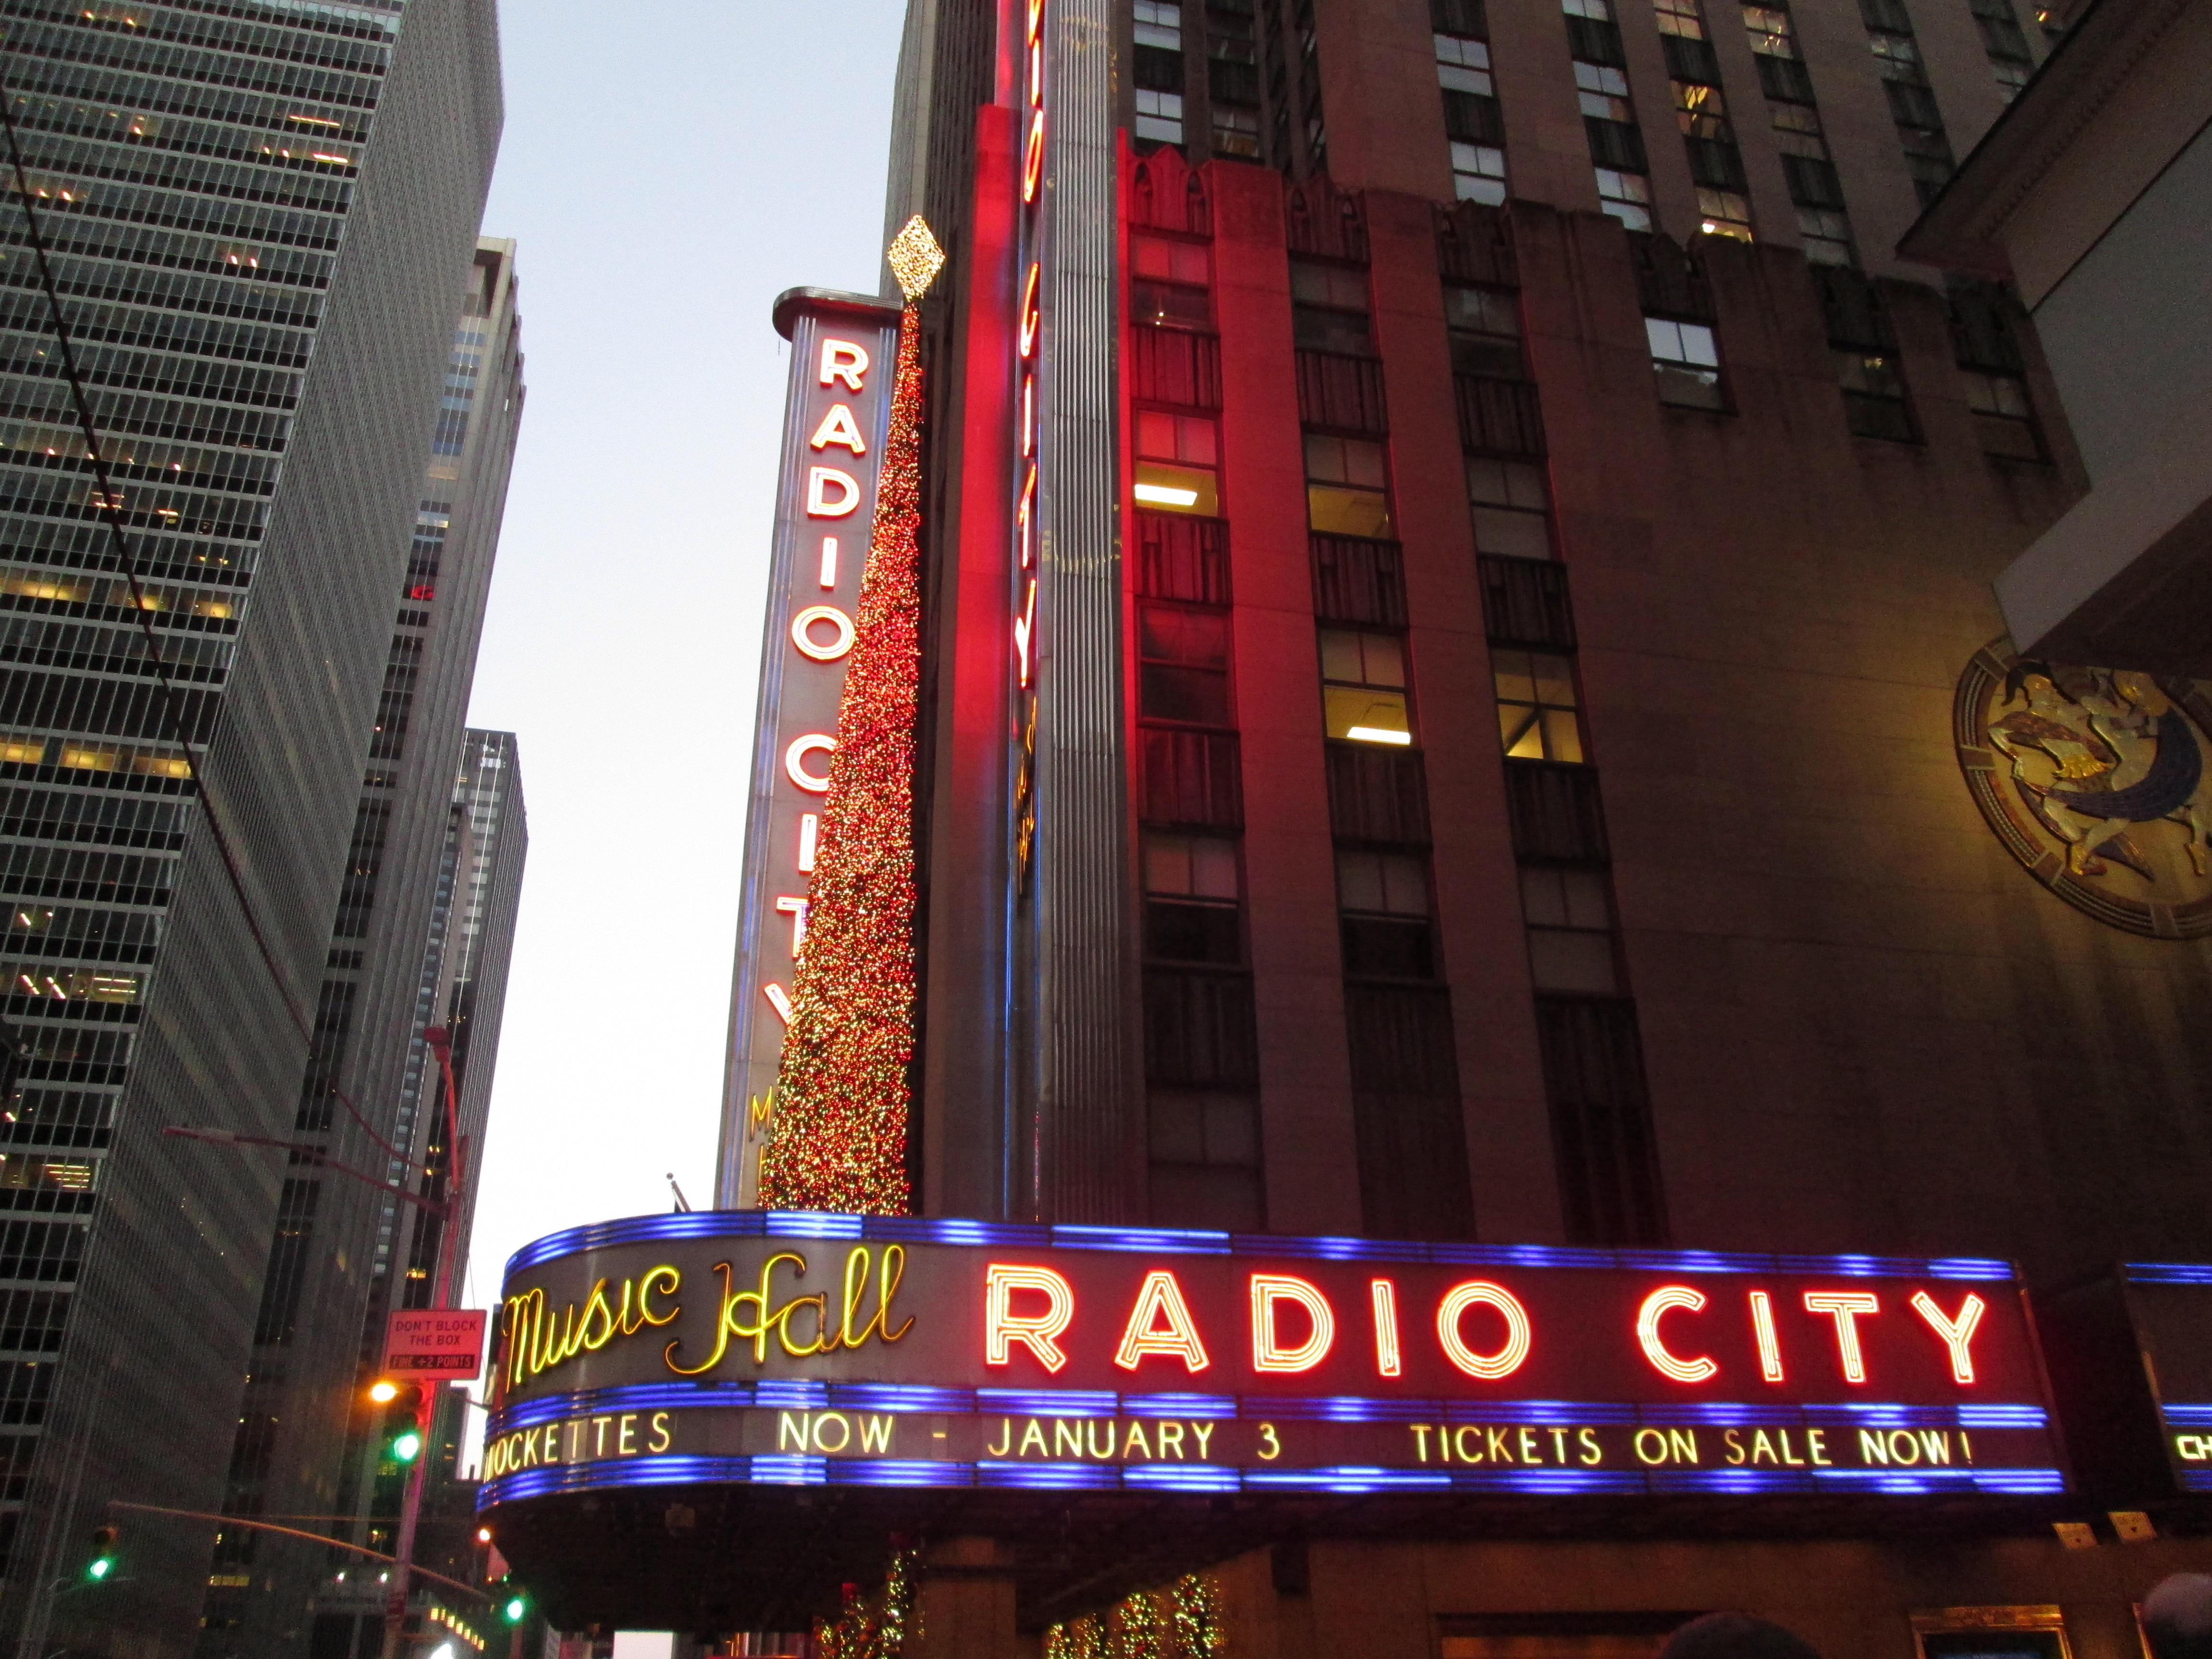 Radio City Music Hall: 9 Spectacular Facts About You Didn't Know